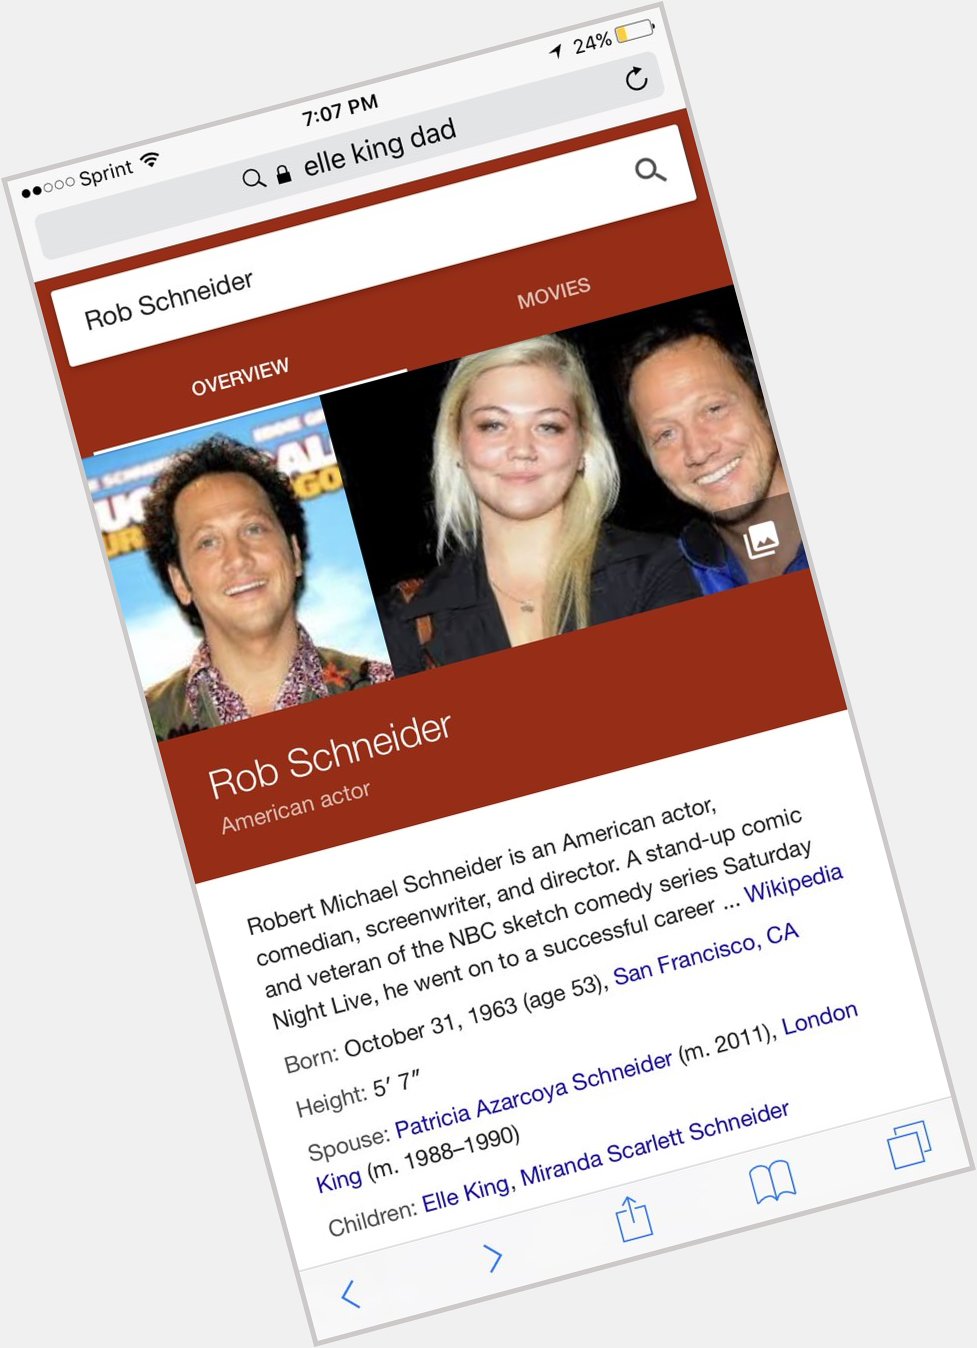 Okay wait two things I\m not ok with. Me and rob Schneider share the same birthday and he\s Elle kings father???? 